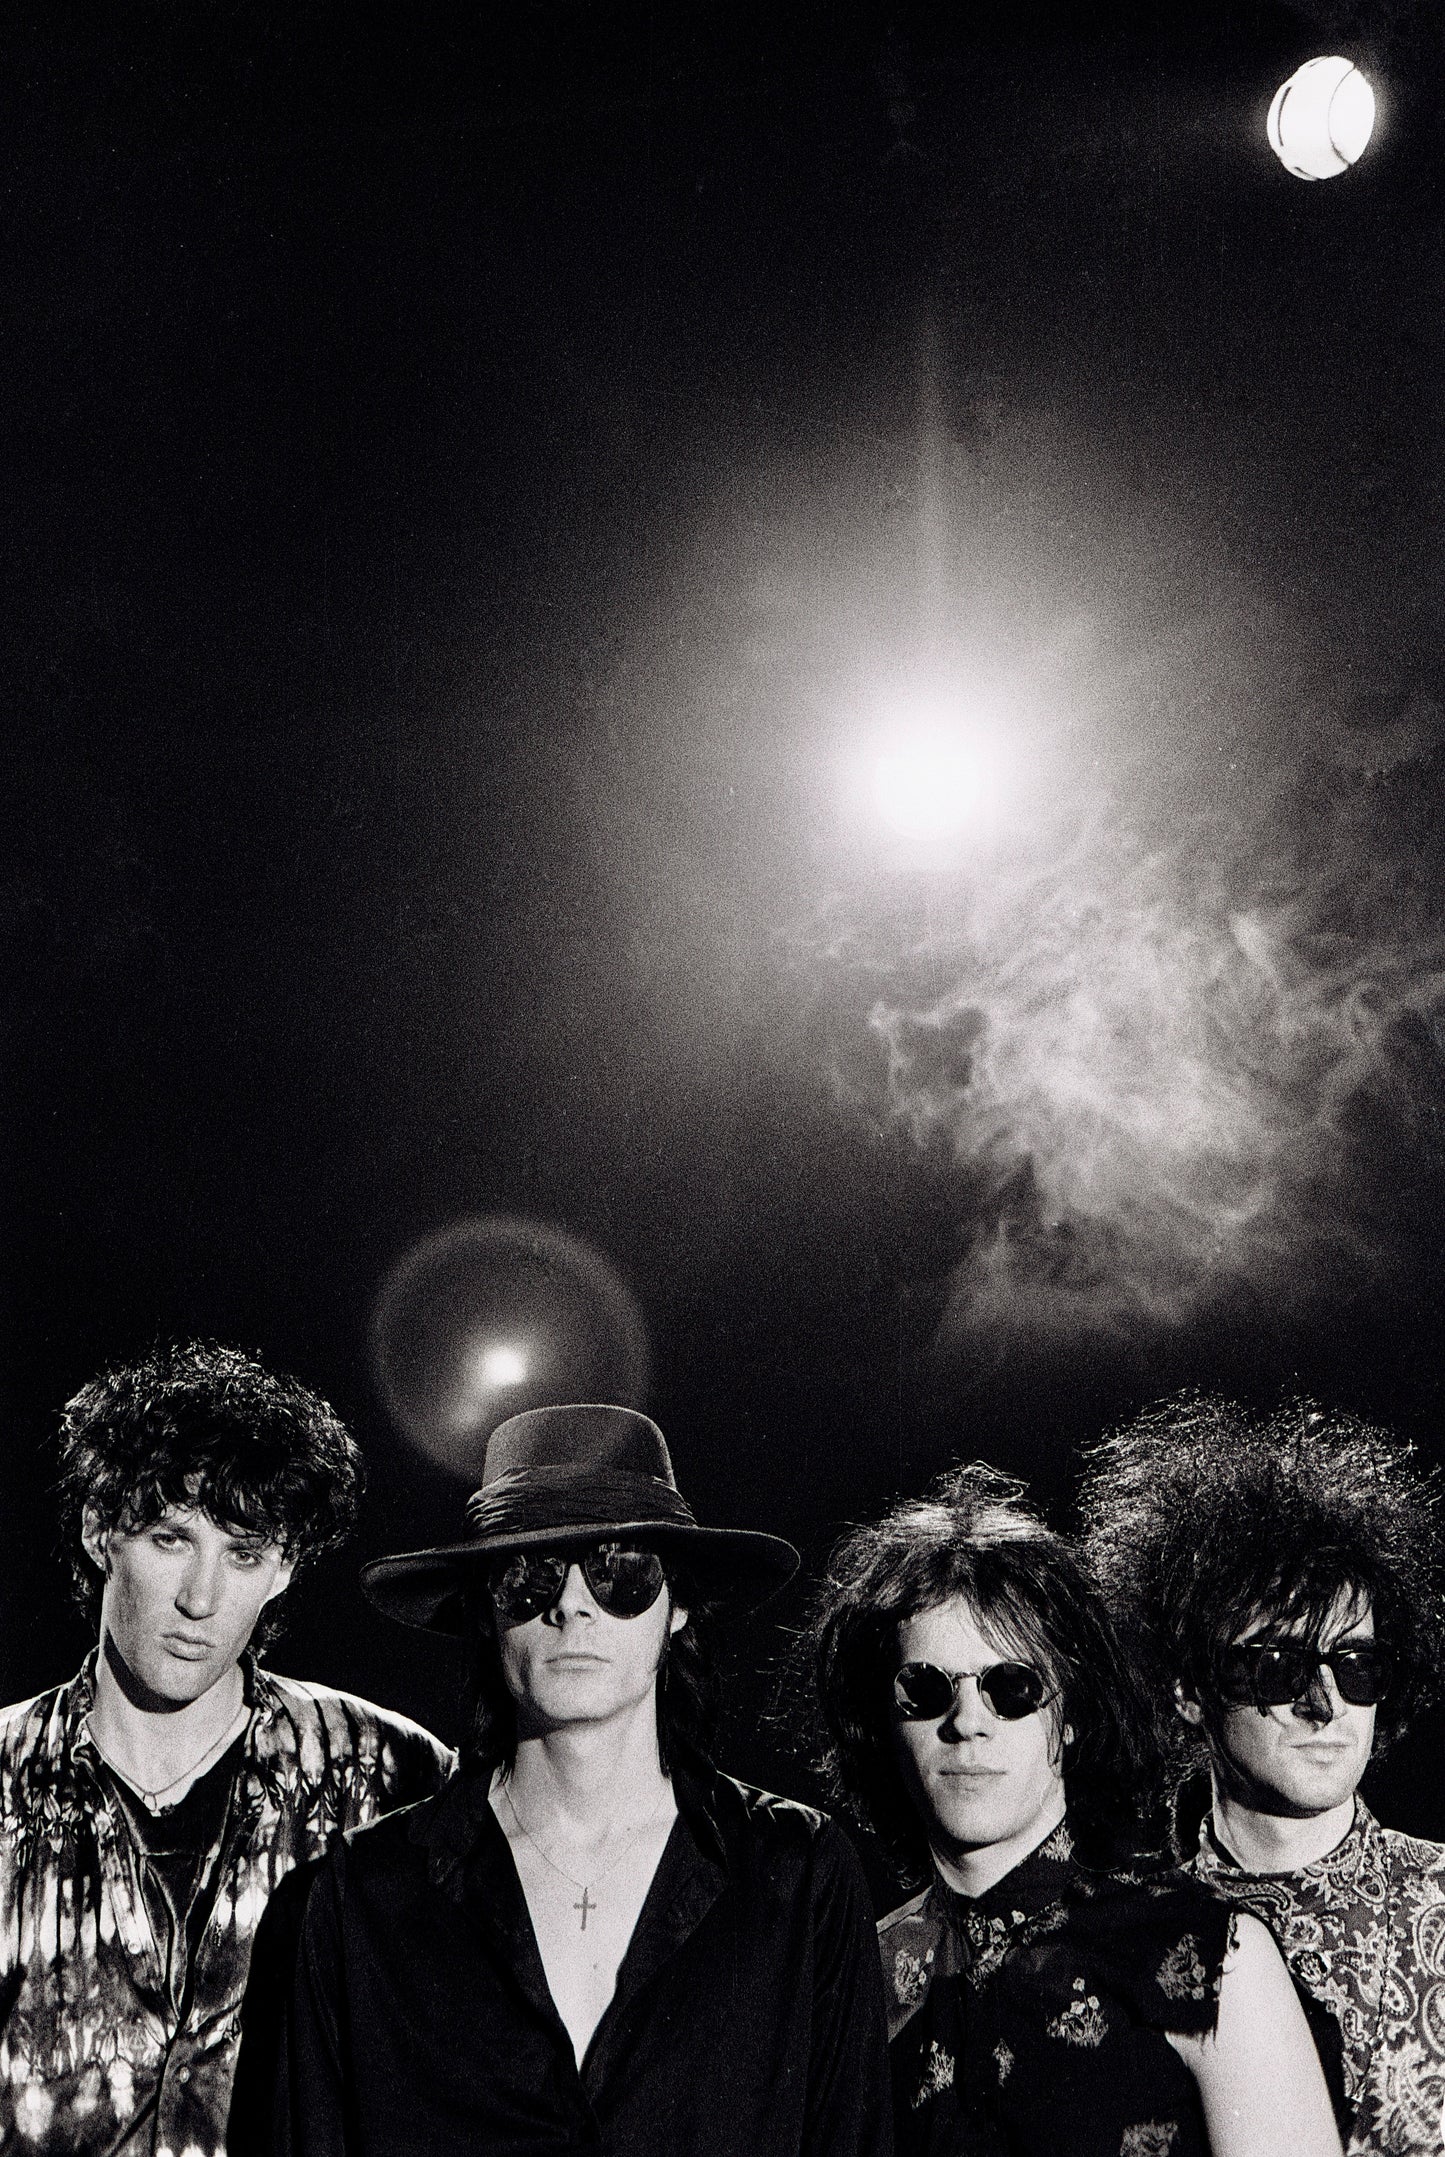 Steve Rapport "Sisters of Mercy" (1984)